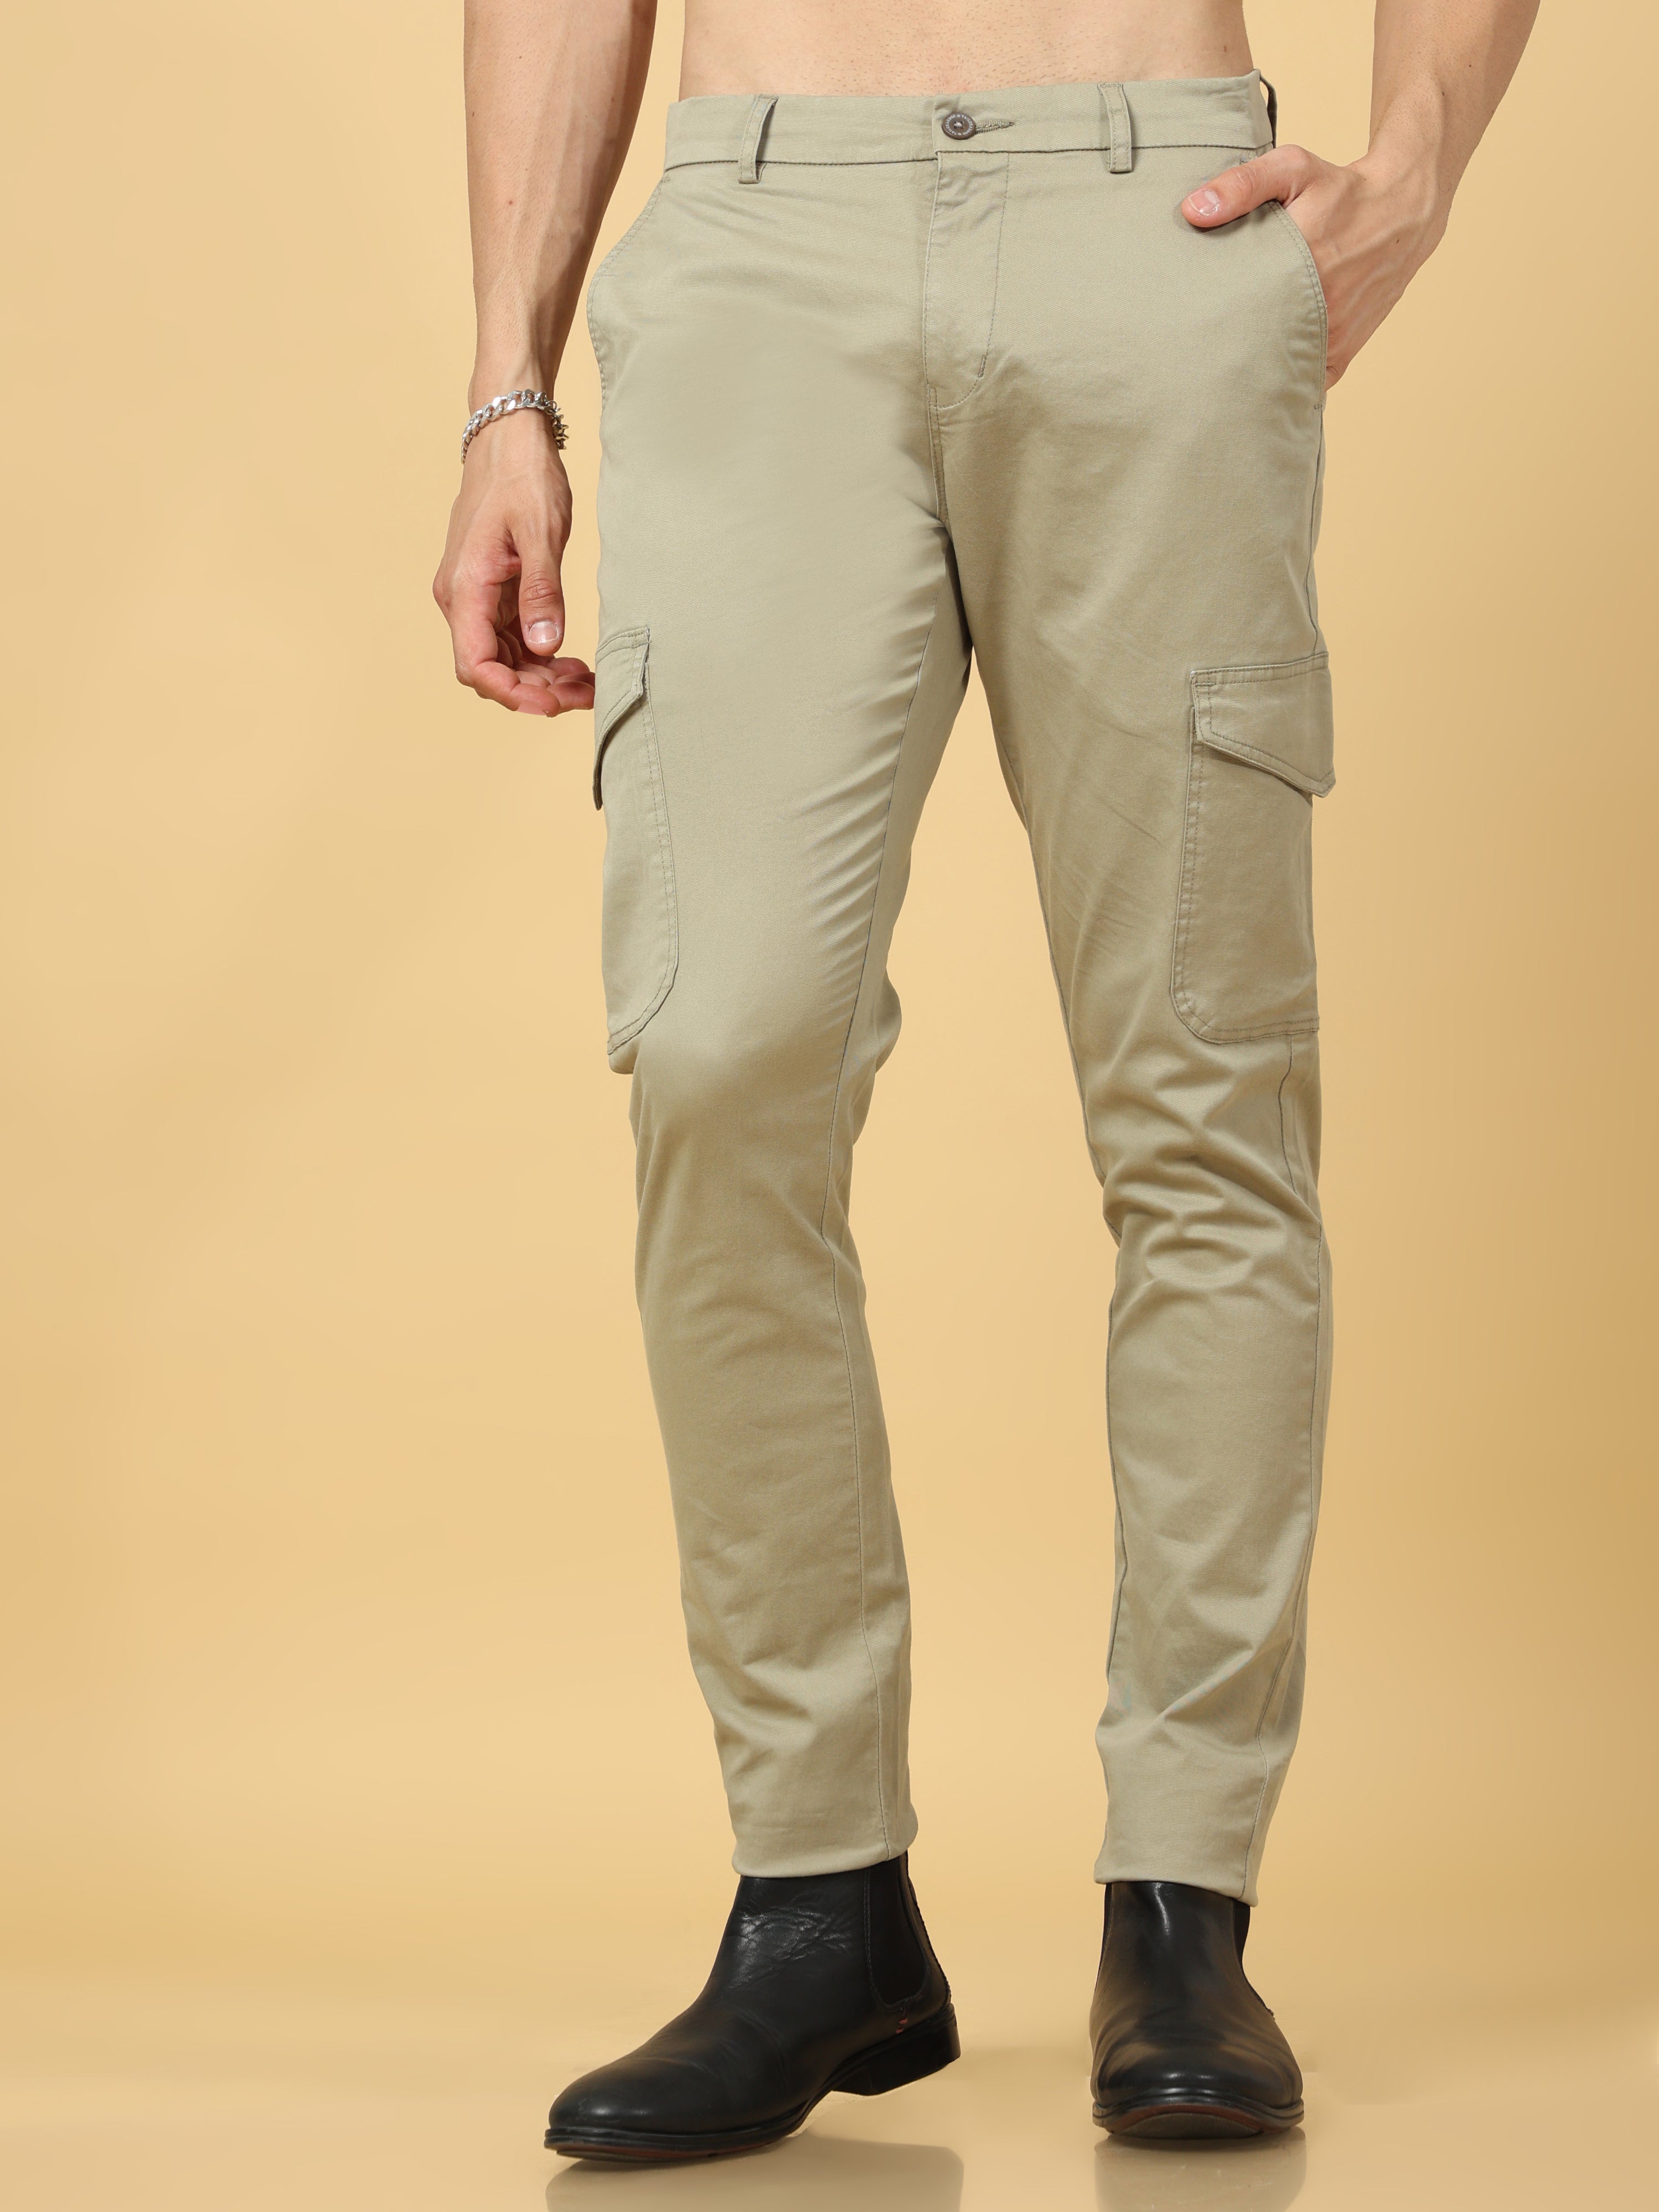 Buy Carbon blue Trousers & Pants for Men by GENIPS WITH LOGO Online |  Ajio.com